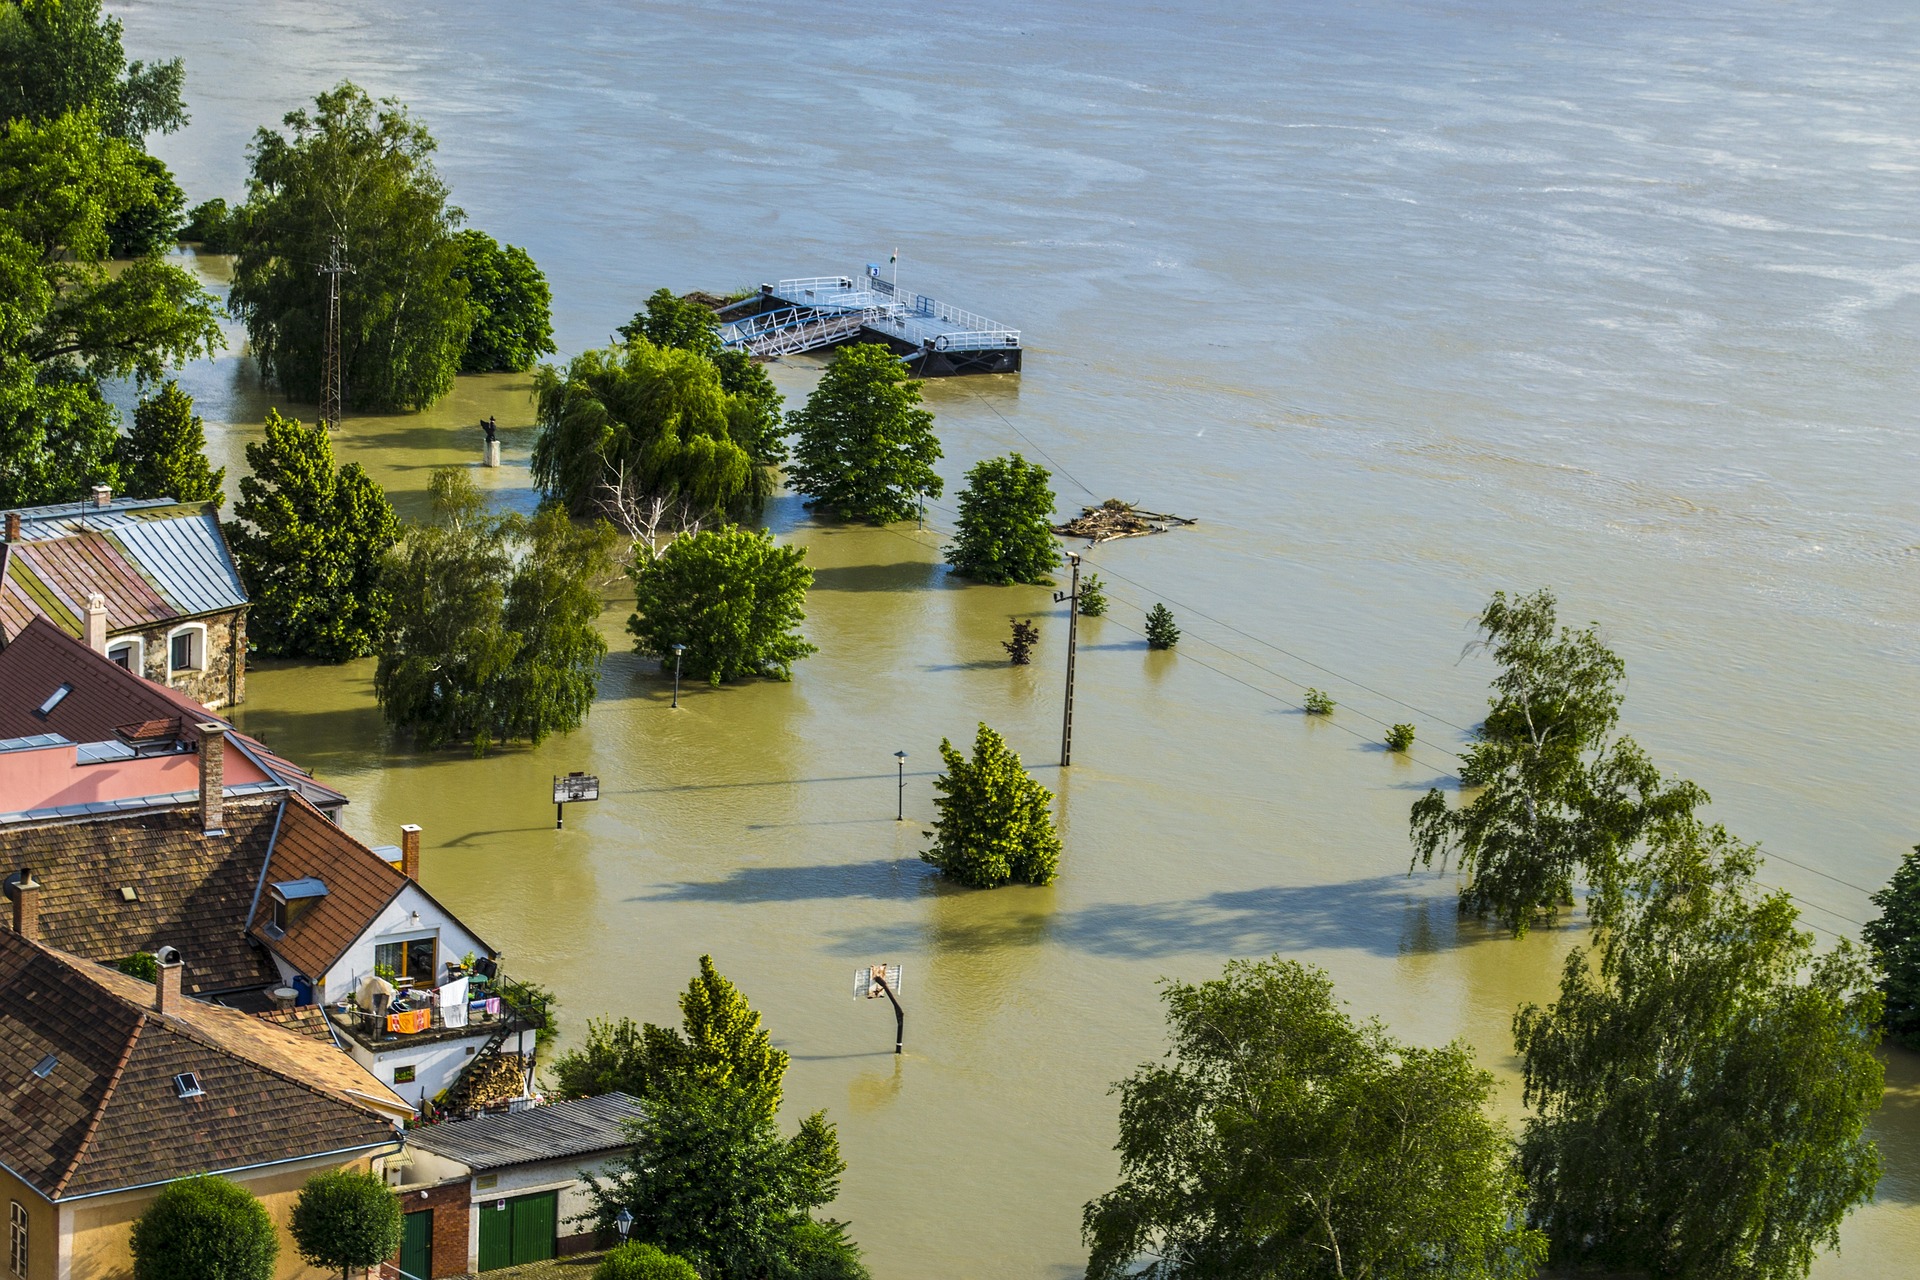 Image by lmaresz from Pixabay - Americans are migrating from areas of high flood risk